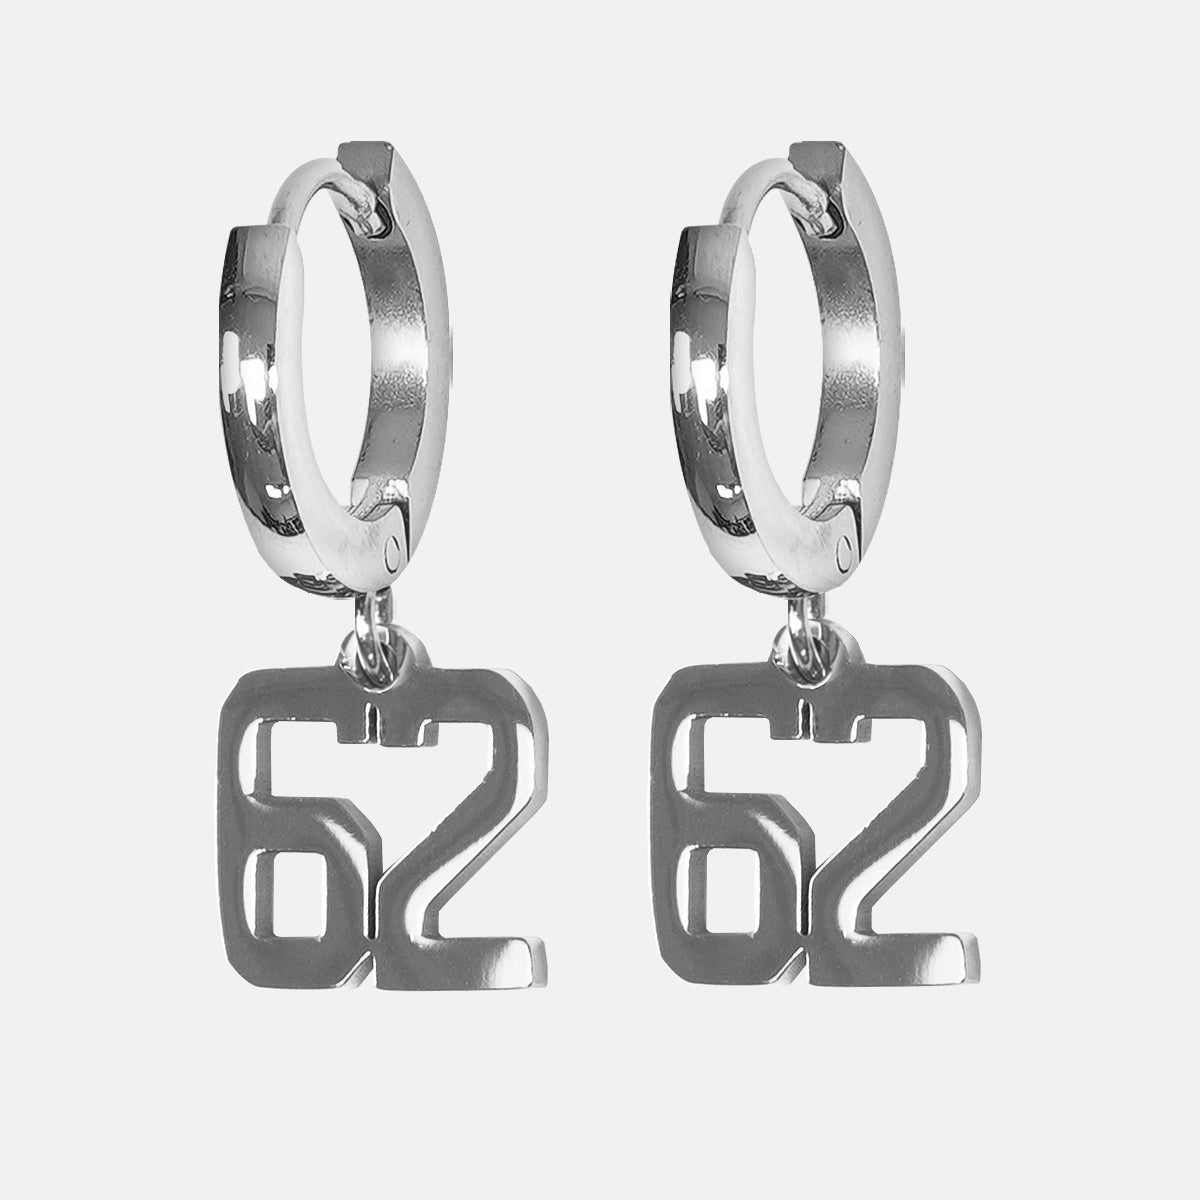 62 Number Earring - Stainless Steel